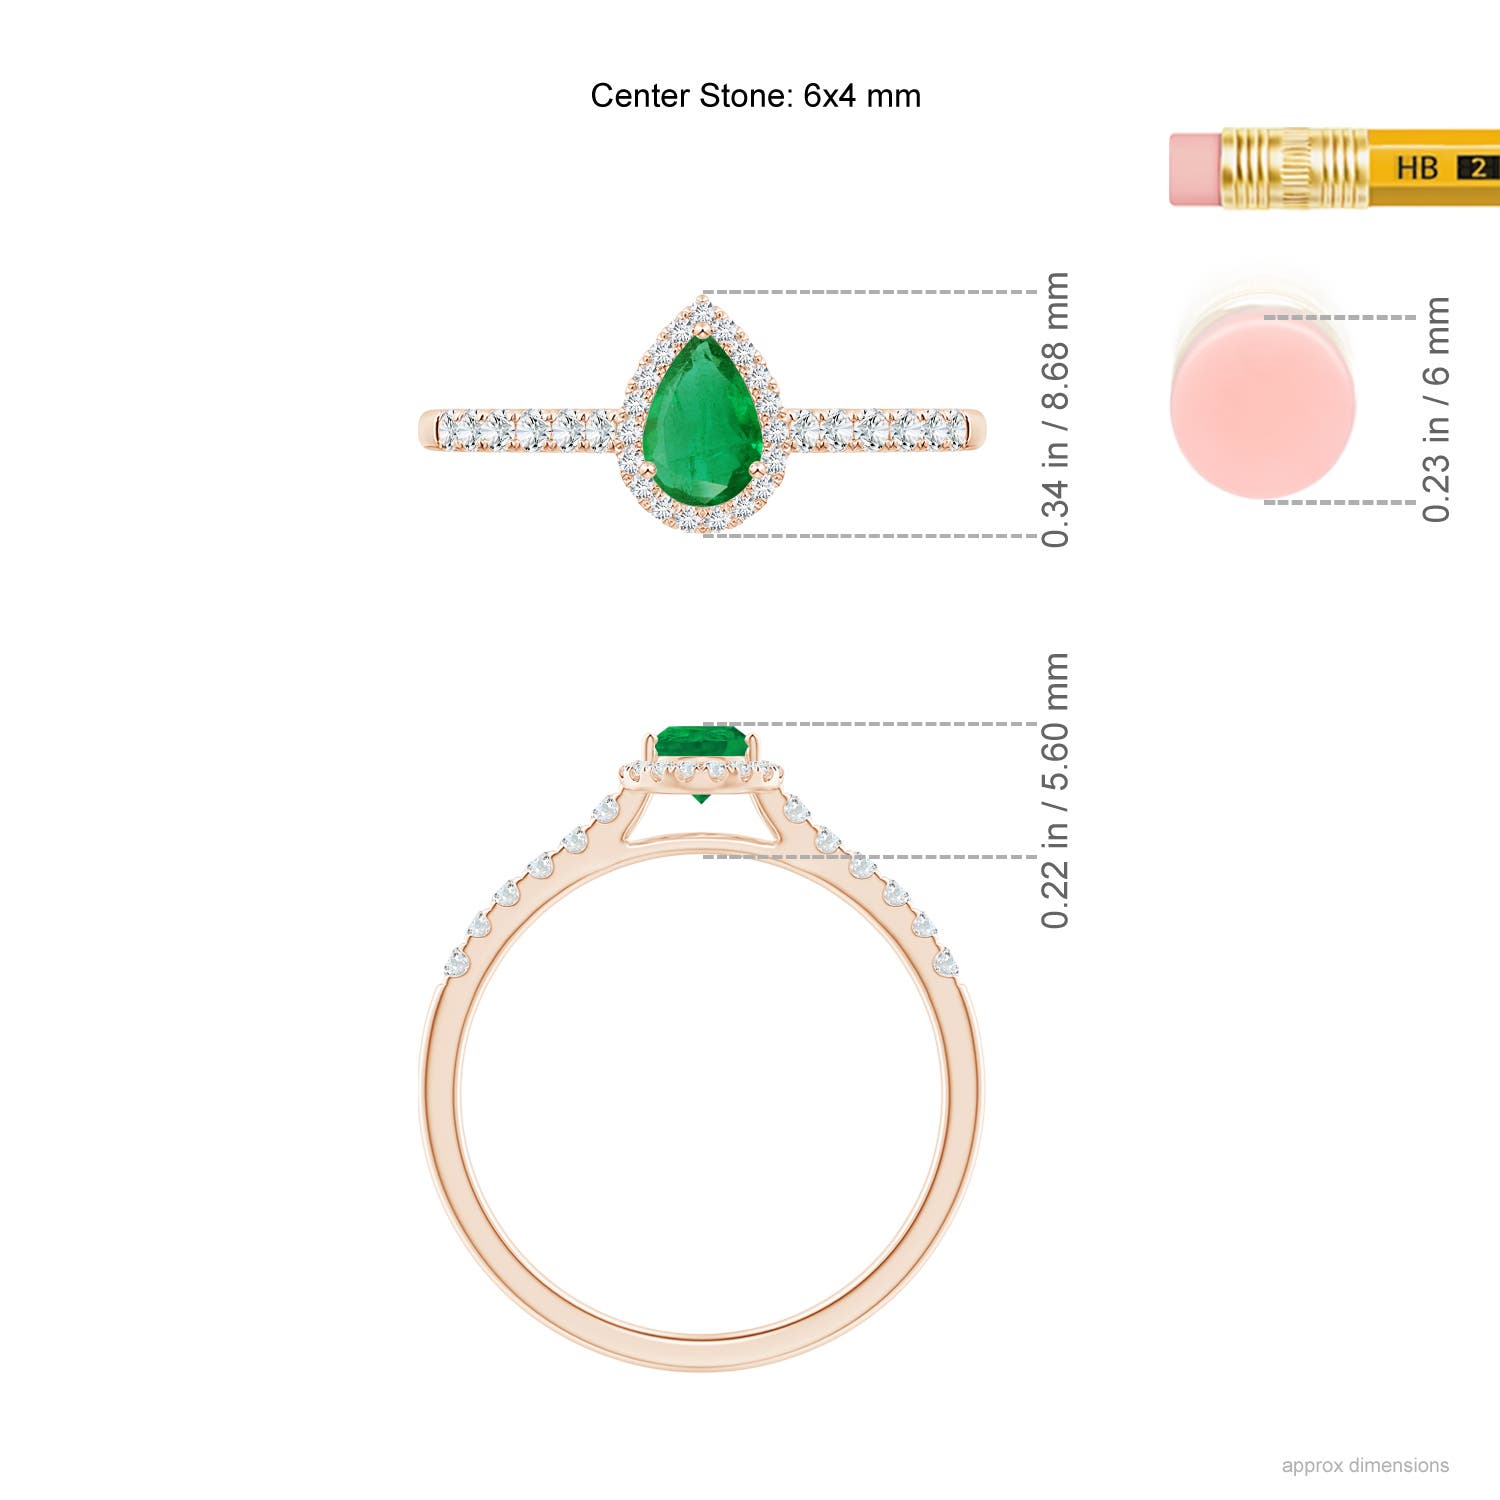 AA - Emerald / 0.56 CT / 14 KT Rose Gold